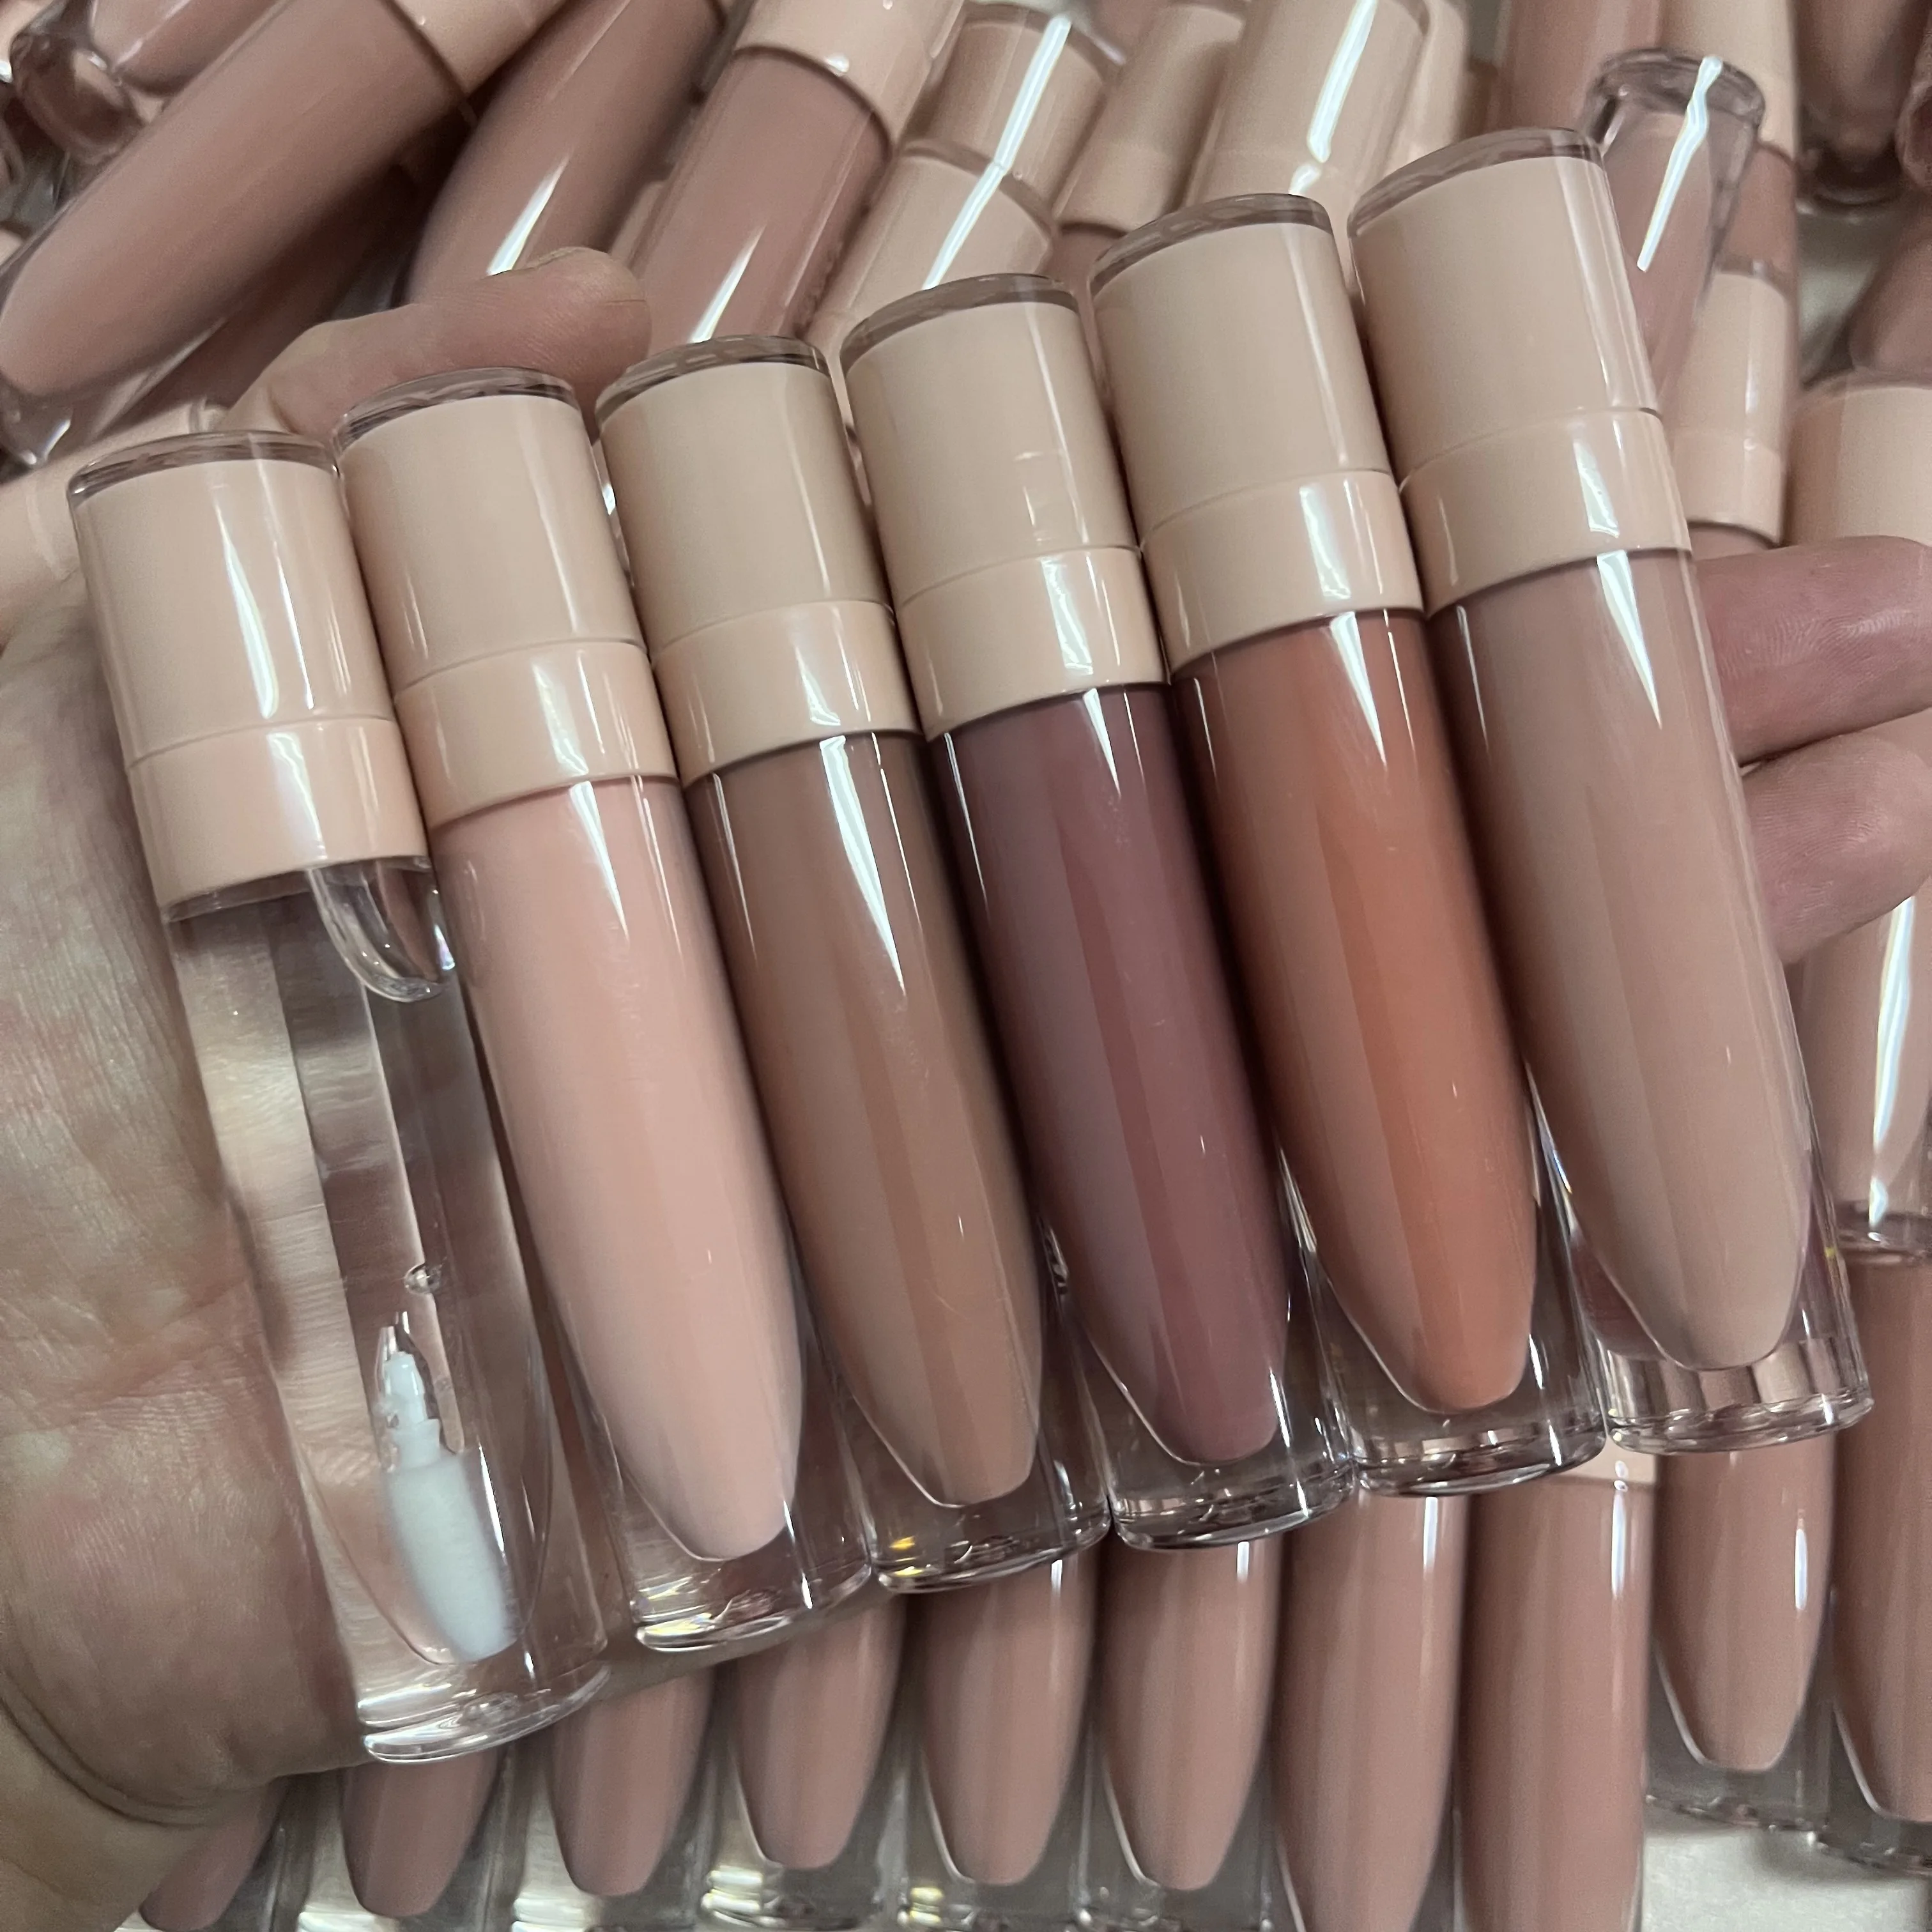 

New arrivals custom lip gloss tubes packaging ampliffied lipstick vegan nude ultra-creamy private label lip gloss